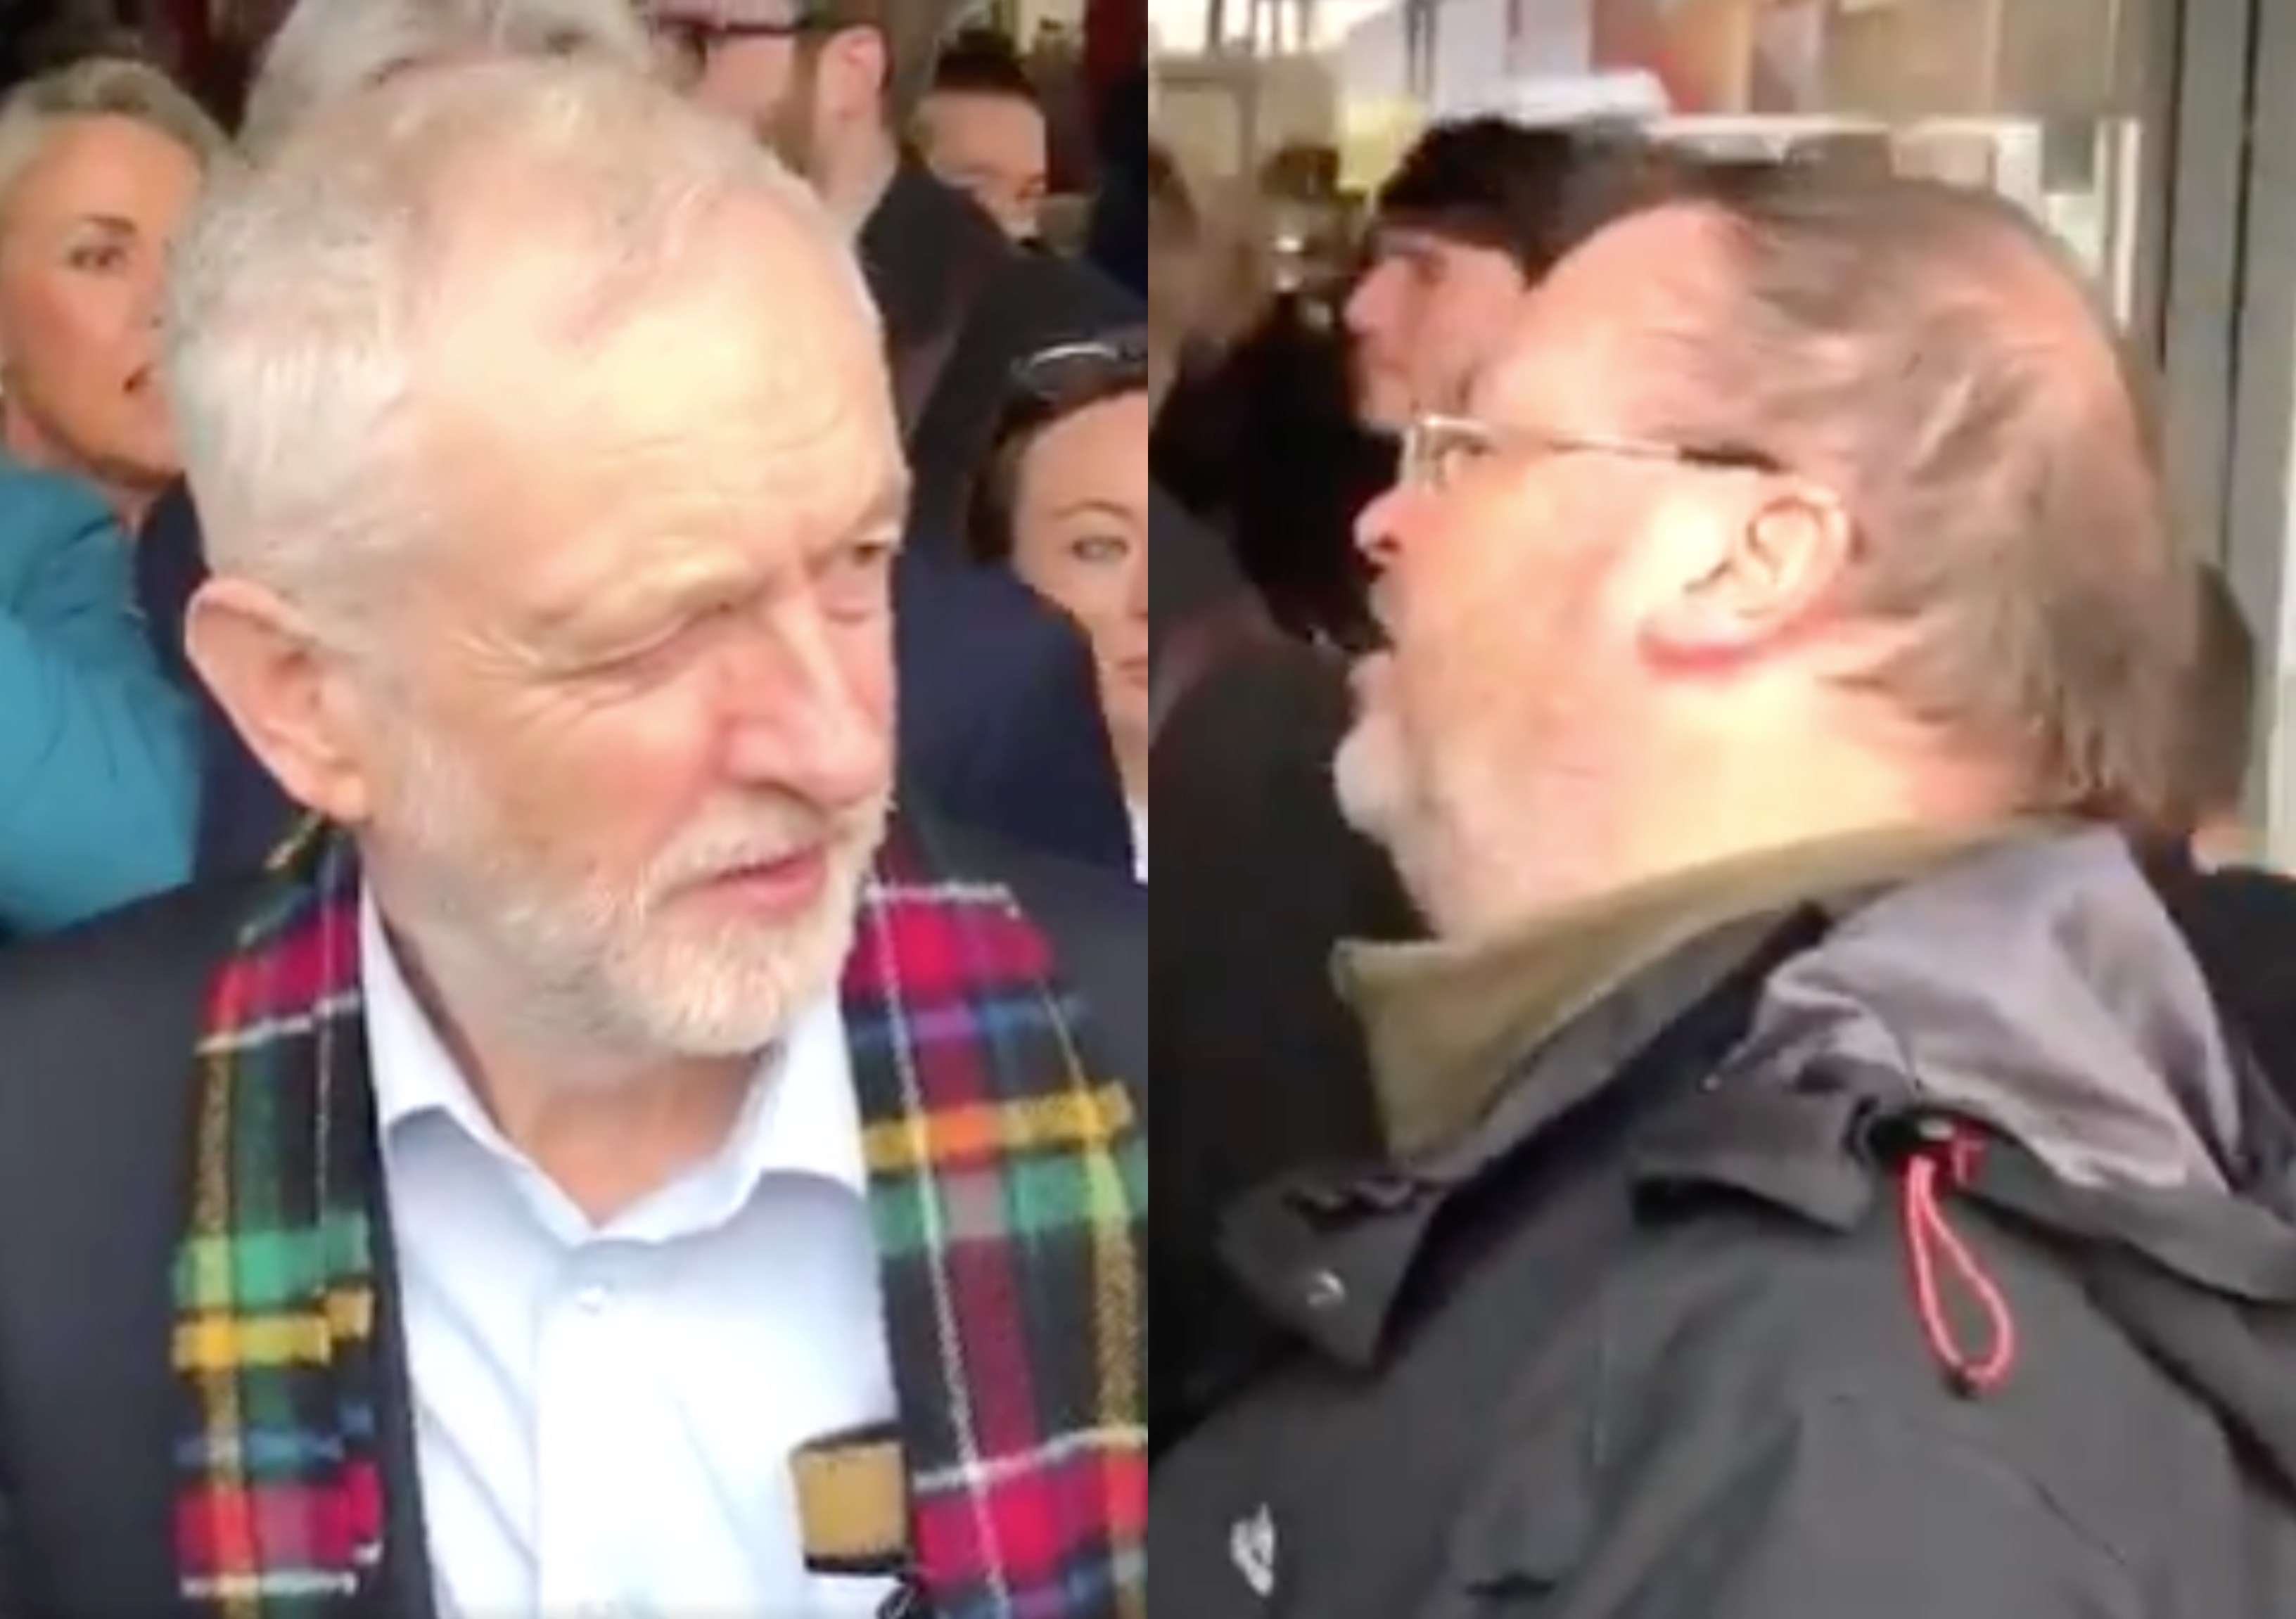 Jeremy Corbyn (L) was heckled by a Church of Scotland minister who has frequently referred to being gay as a "perversion". (Screen captures via Twitter)